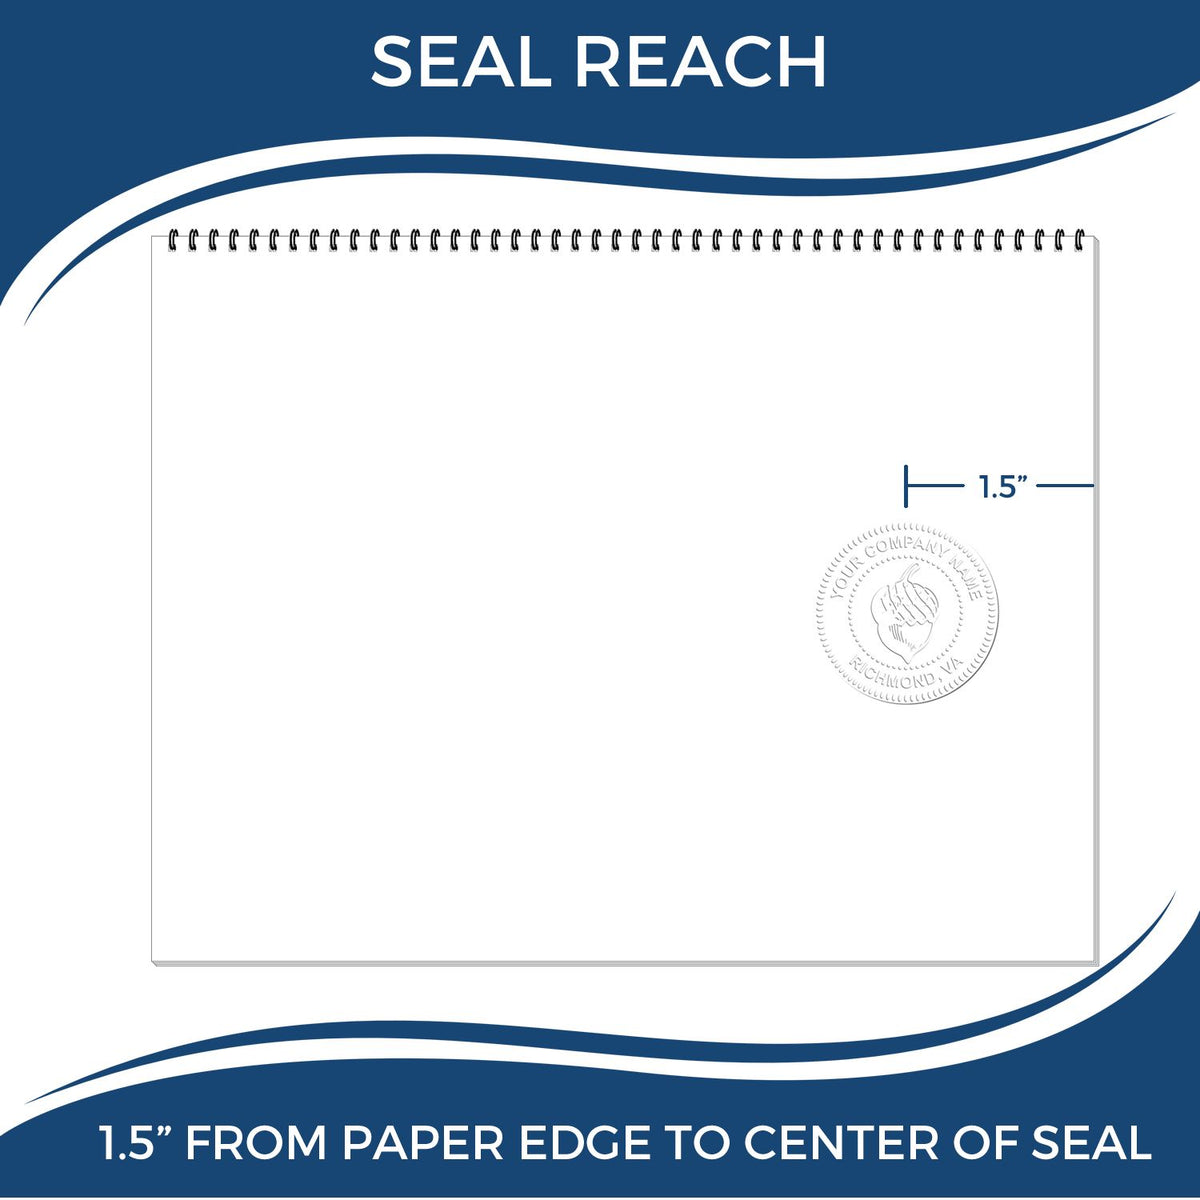 An infographic showing the seal reach which is represented by a ruler and a miniature seal image of the Hybrid Delaware Landscape Architect Seal